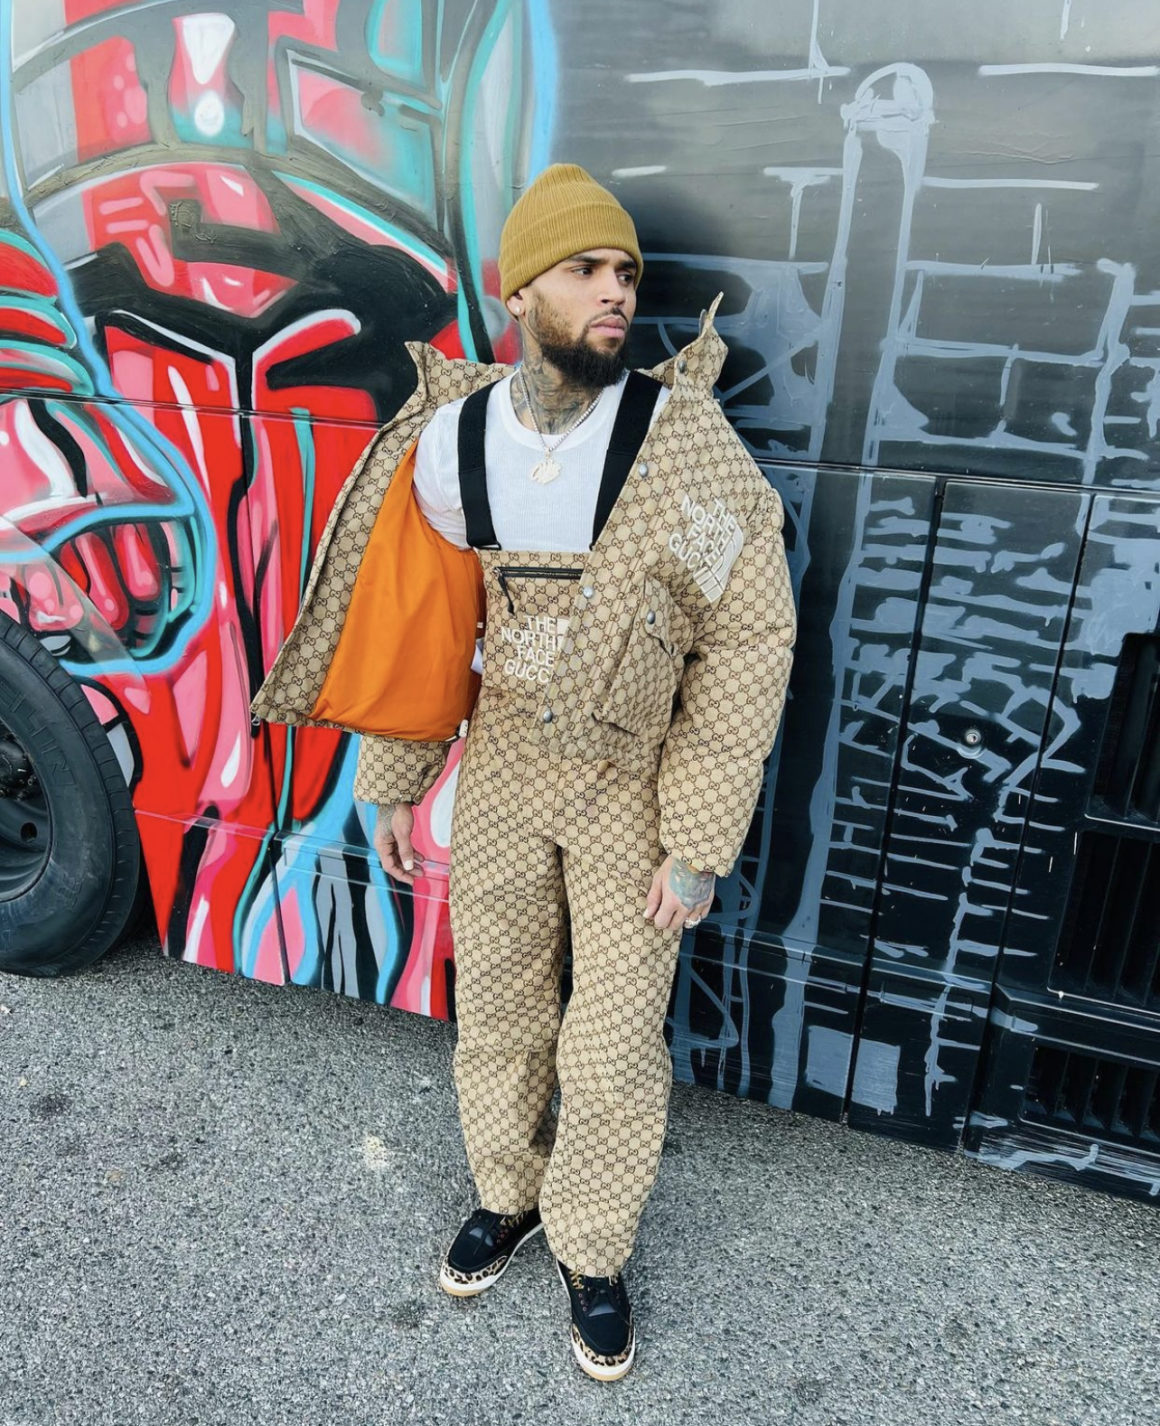 Chris Brown Spotted in Gucci x The North Face Monogram Jacket and Overalls  Paired With Air Jordan 3 Sneakers – Fashion Bomb Daily